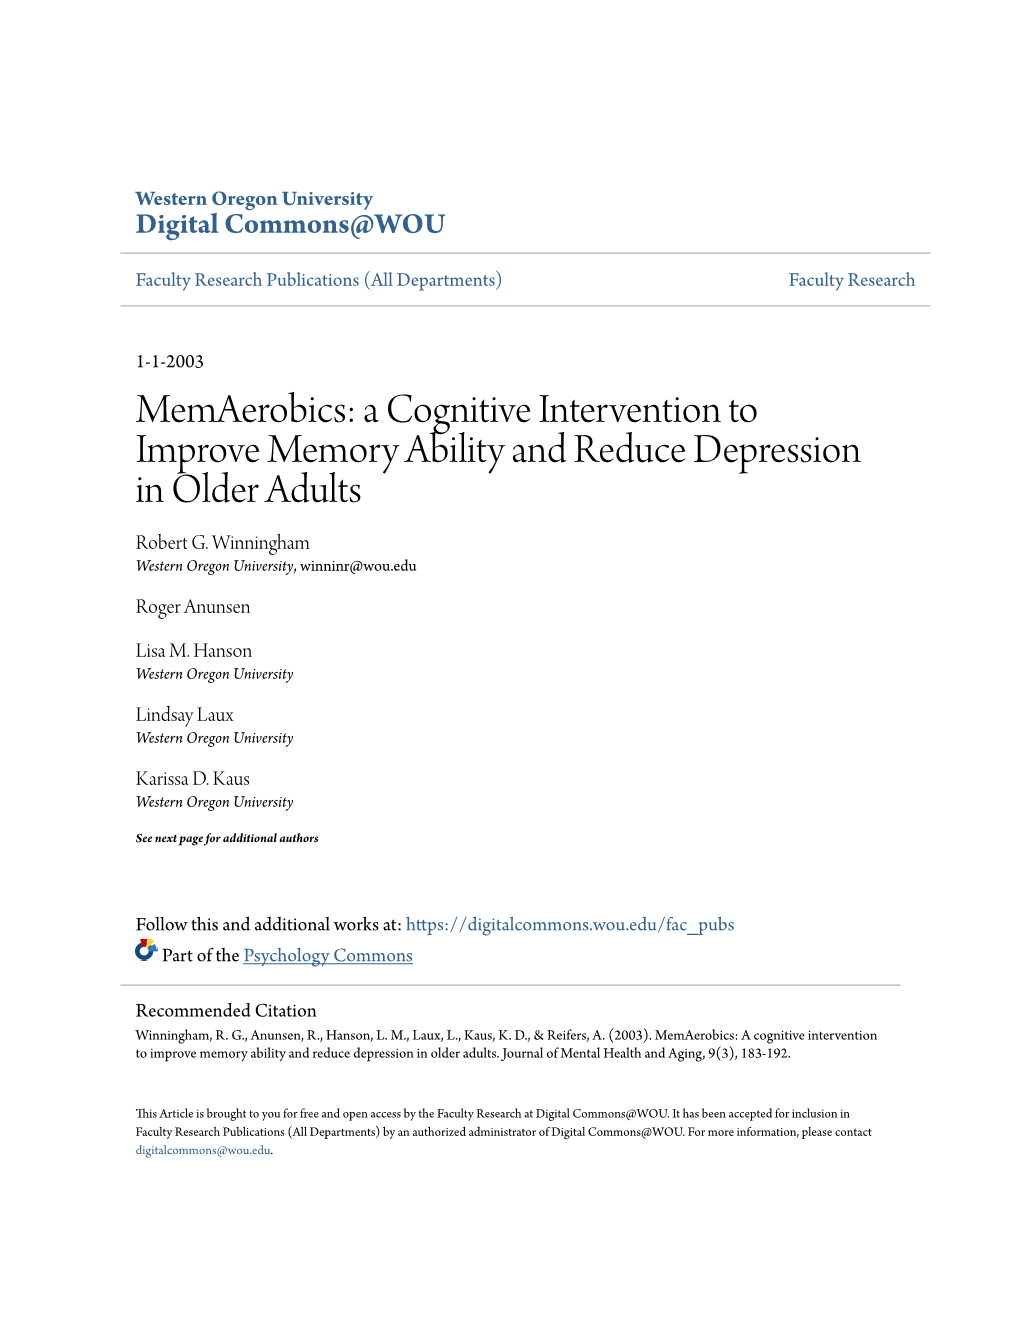 A Cognitive Intervention to Improve Memory Ability and Reduce Depression in Older Adults Robert G